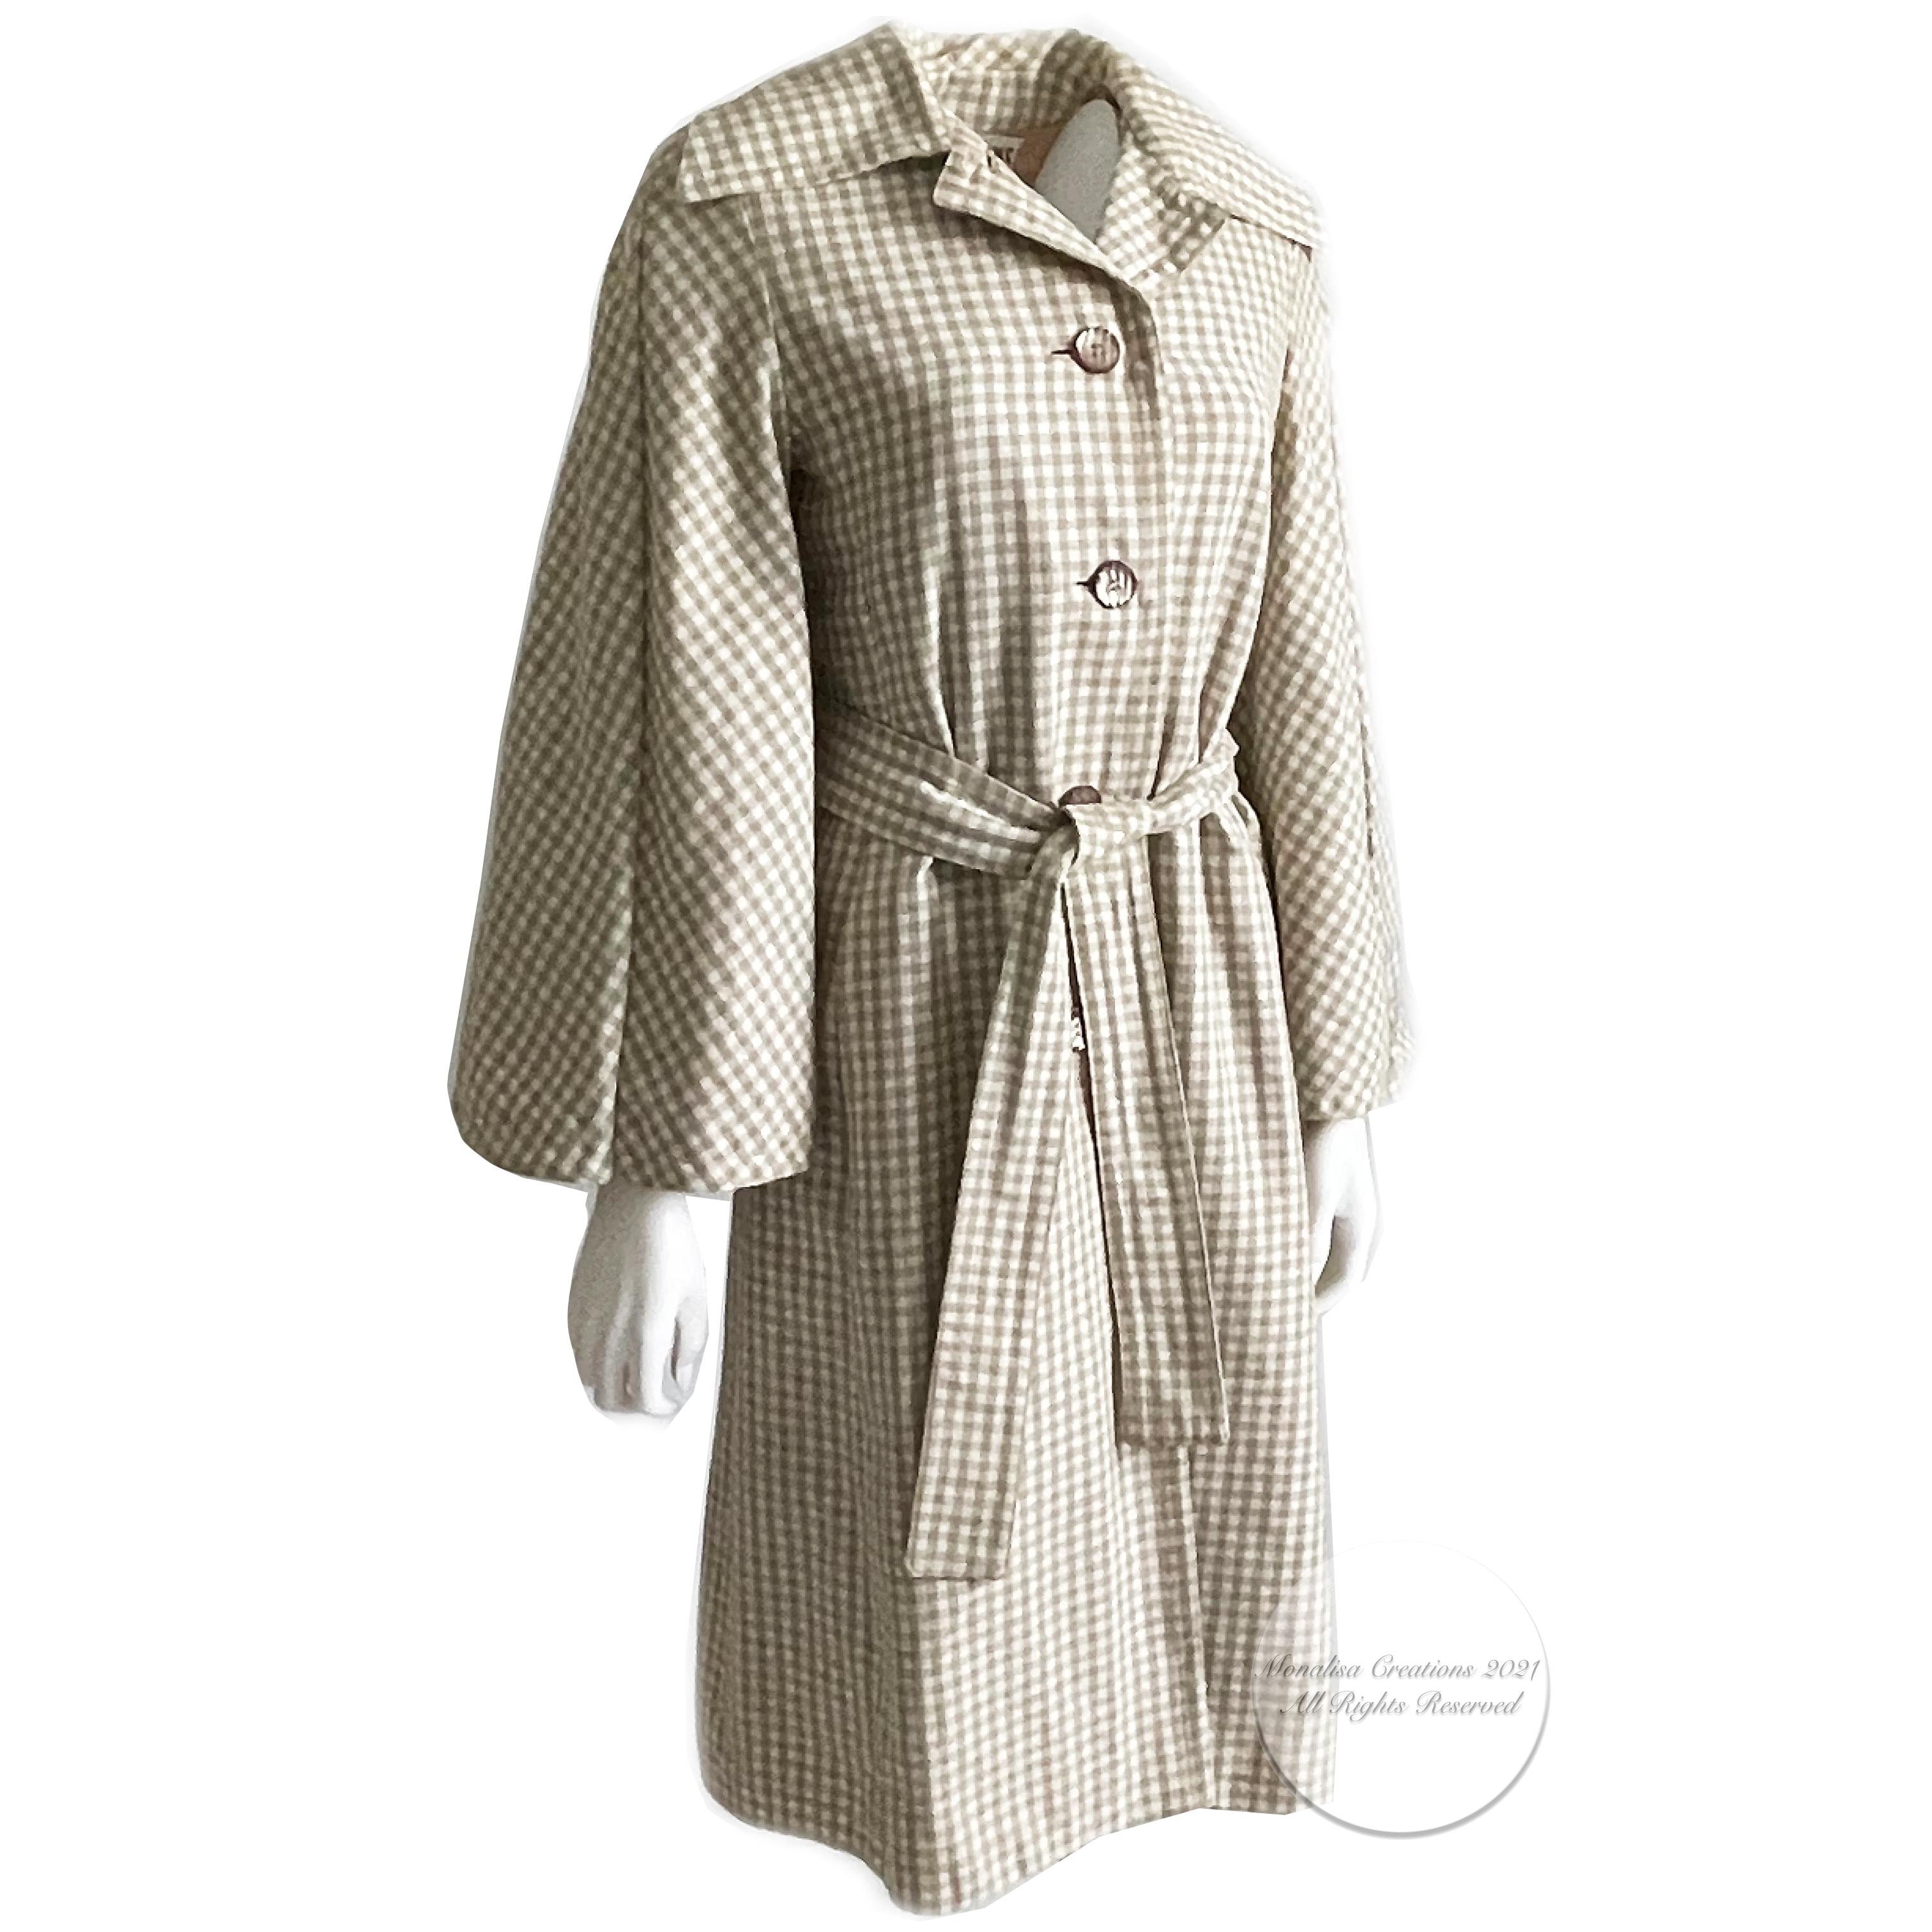 Women's Donald Brooks Trench Coat Jacket with Caplet Check Pattern Vintage 70s 